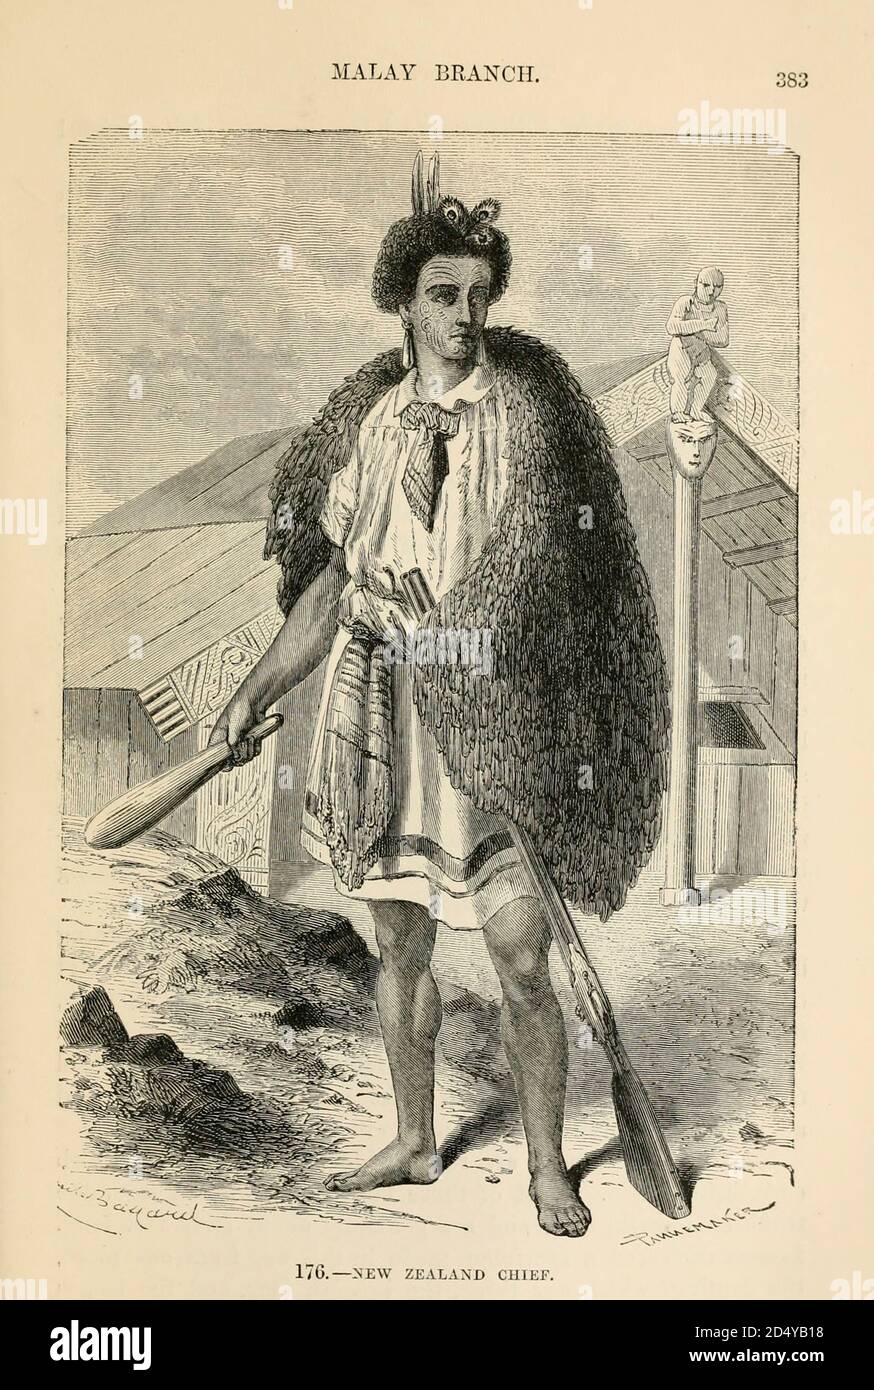 New Zealand Chief [Maori] with club engraving on wood From The human race by Figuier, Louis, (1819-1894) Publication in 1872 Publisher: New York, Appleton Stock Photo